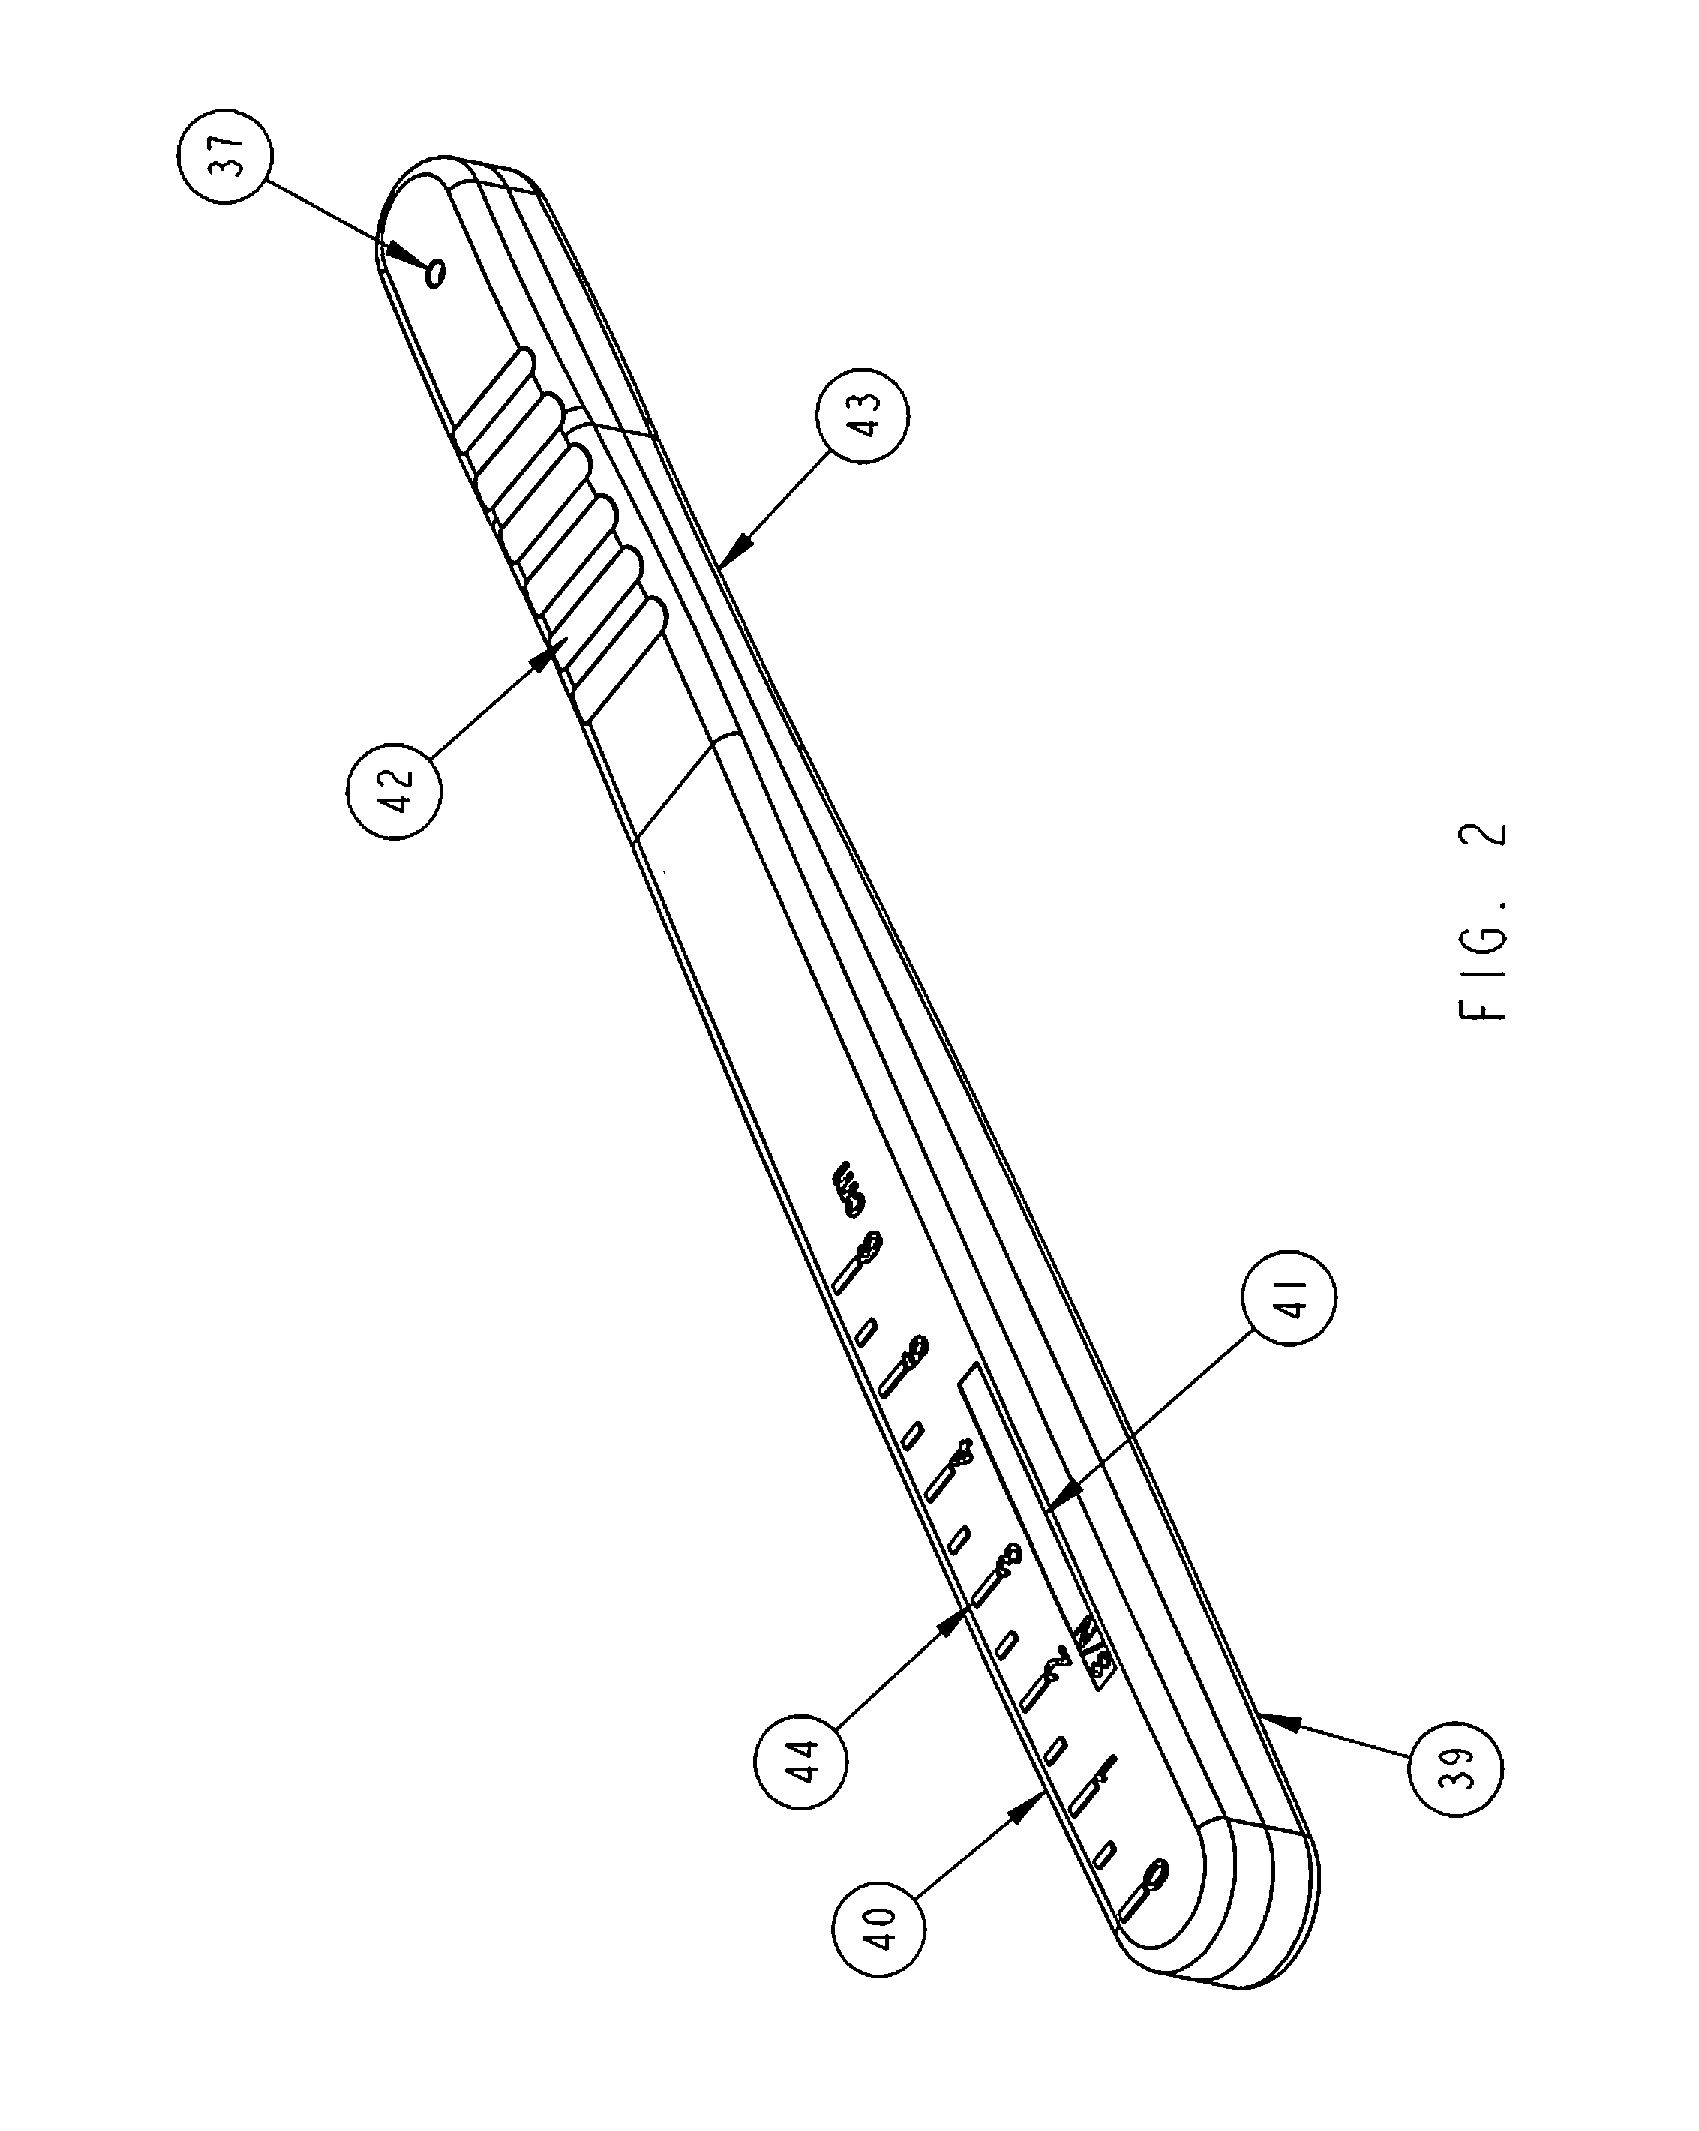 Surgical Scalpel Handle Assembly System And Method For Requiring A Verification Process Performed Prior To And During Surgery Using Actuators to Unlock And Engage Blade Holder in Ready For Cutting Position